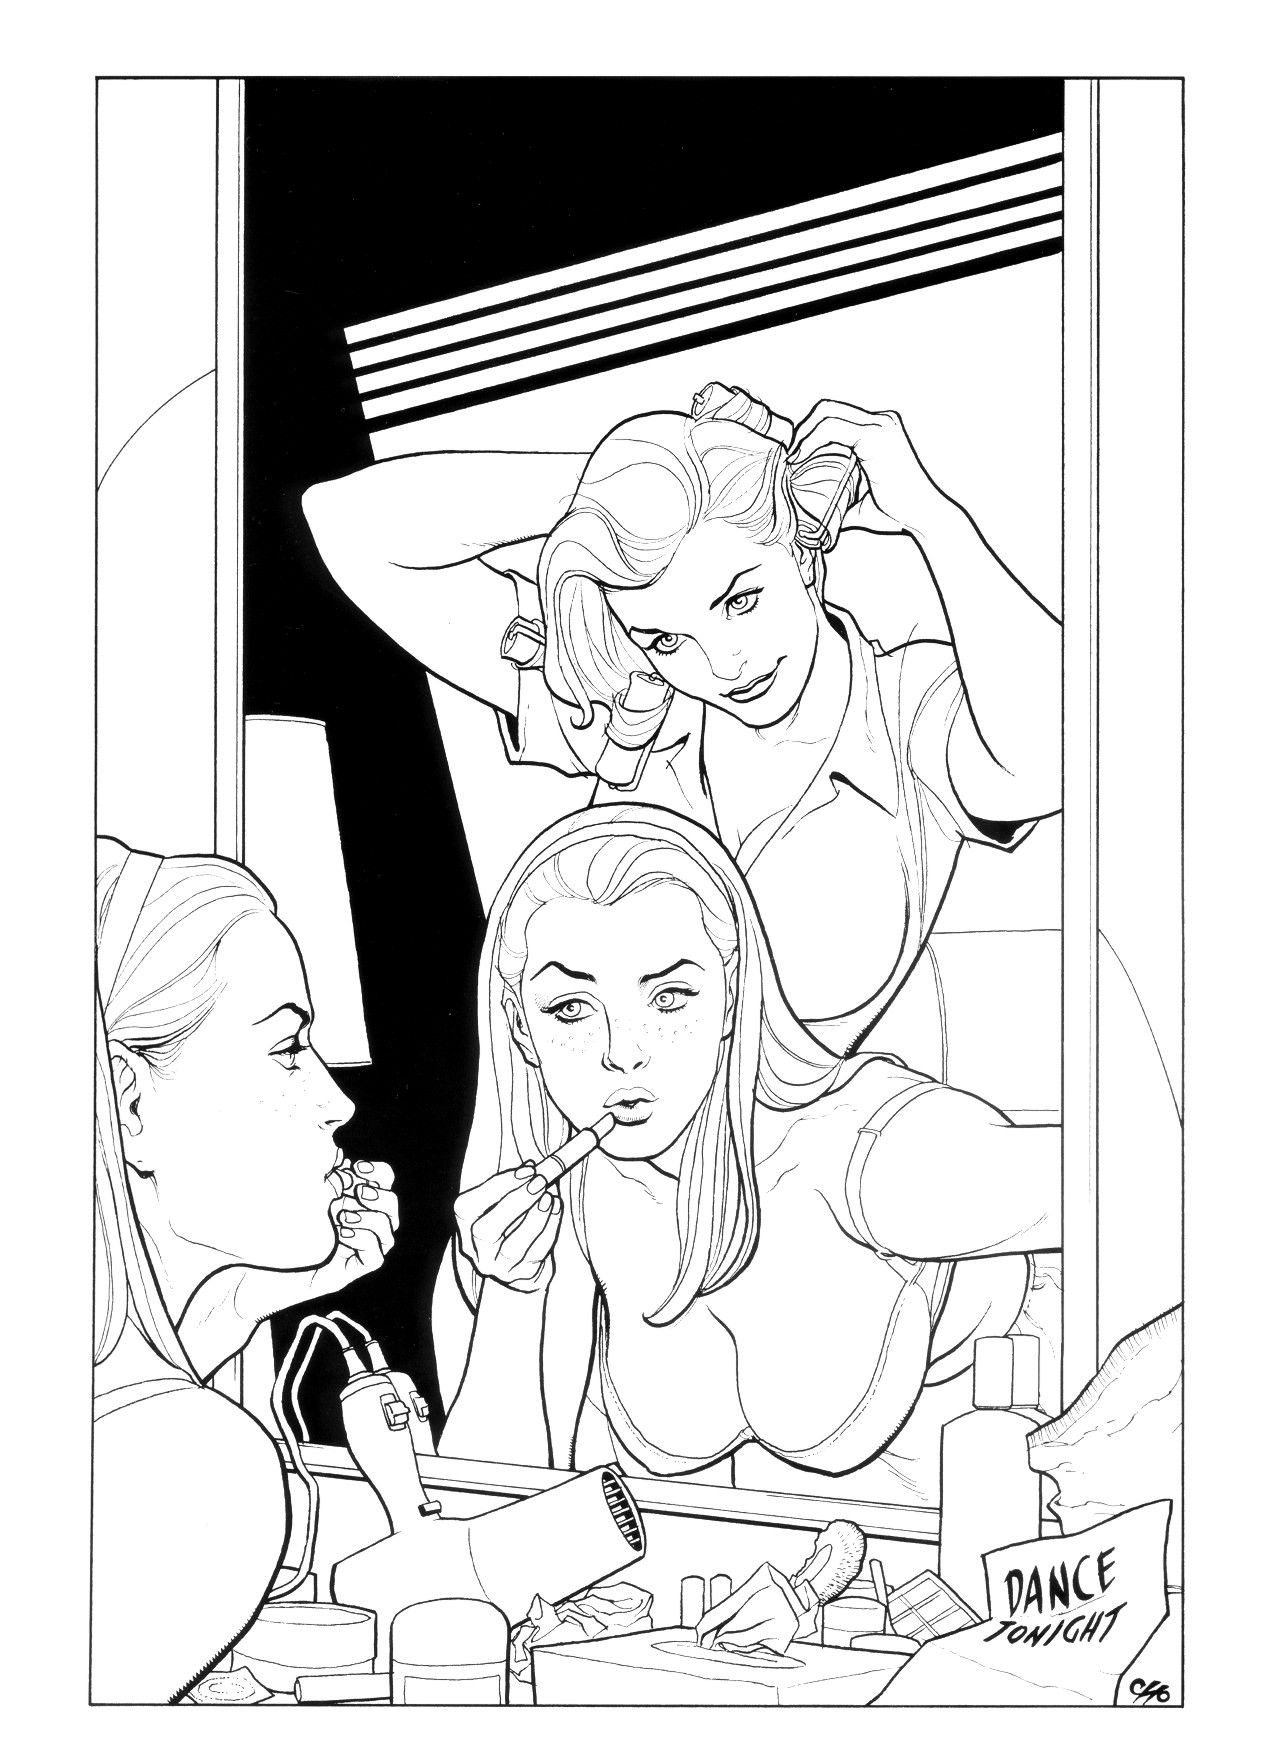 [Frank Cho] Women - Selected Drawings and Illustrations 5